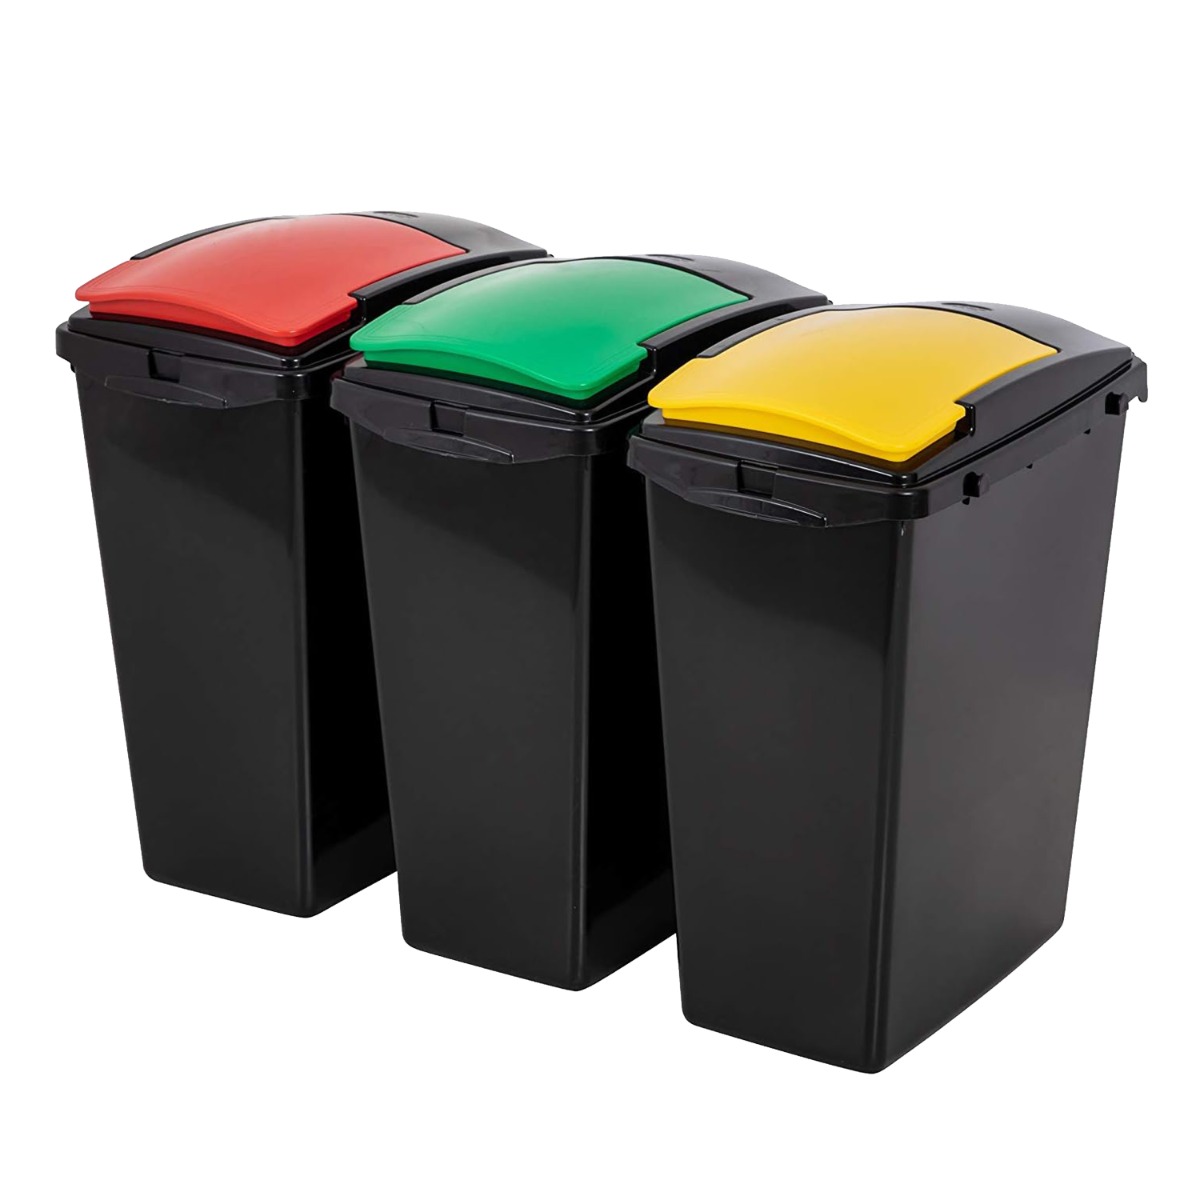 Addis 40L Yellow, Red & Green Recycling Bins - Set of 3